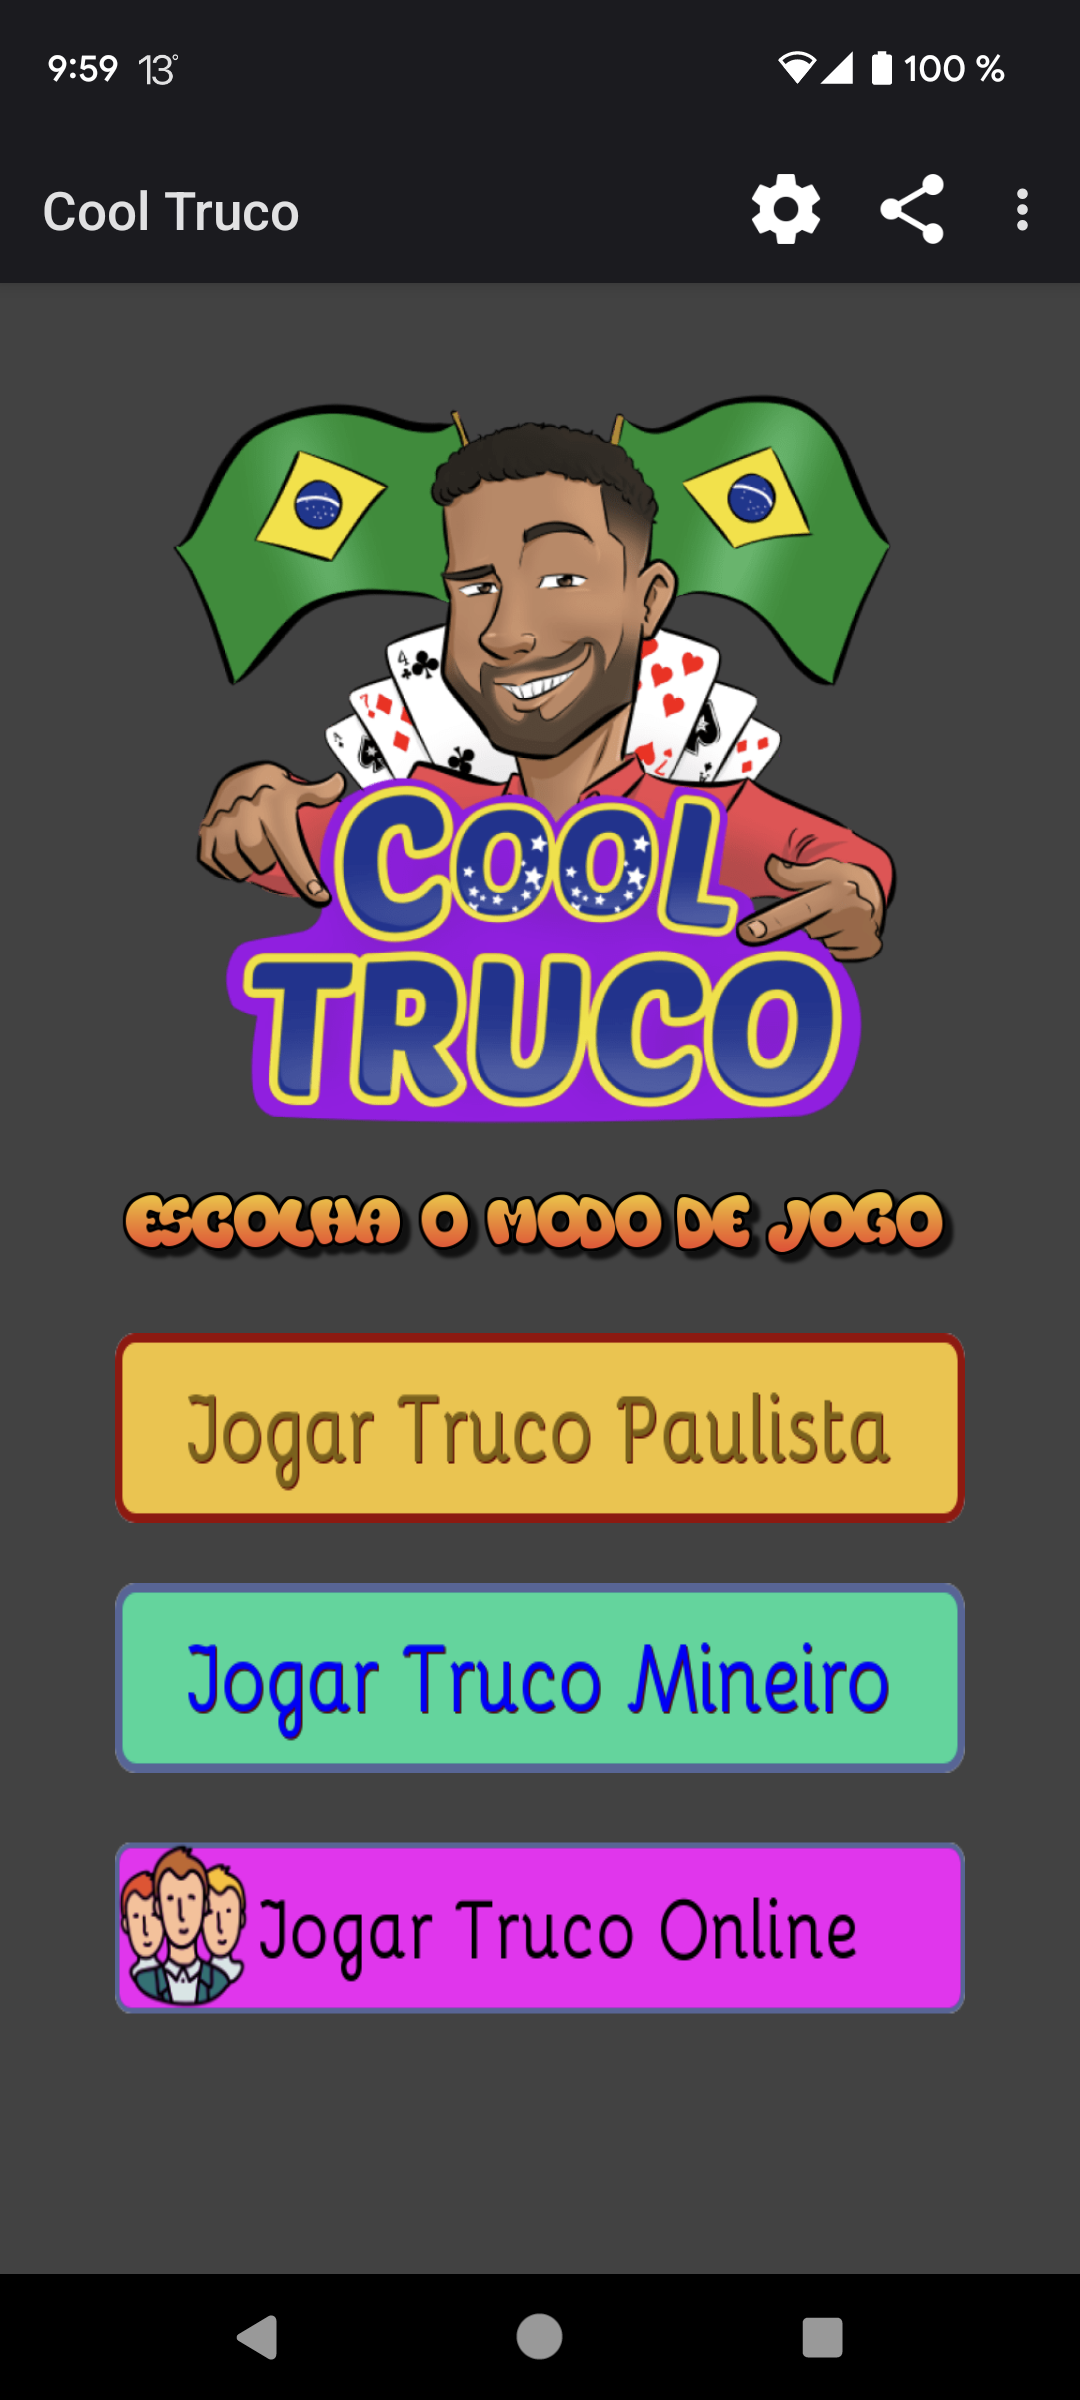 TrucoON - Truco Online - APK Download for Android